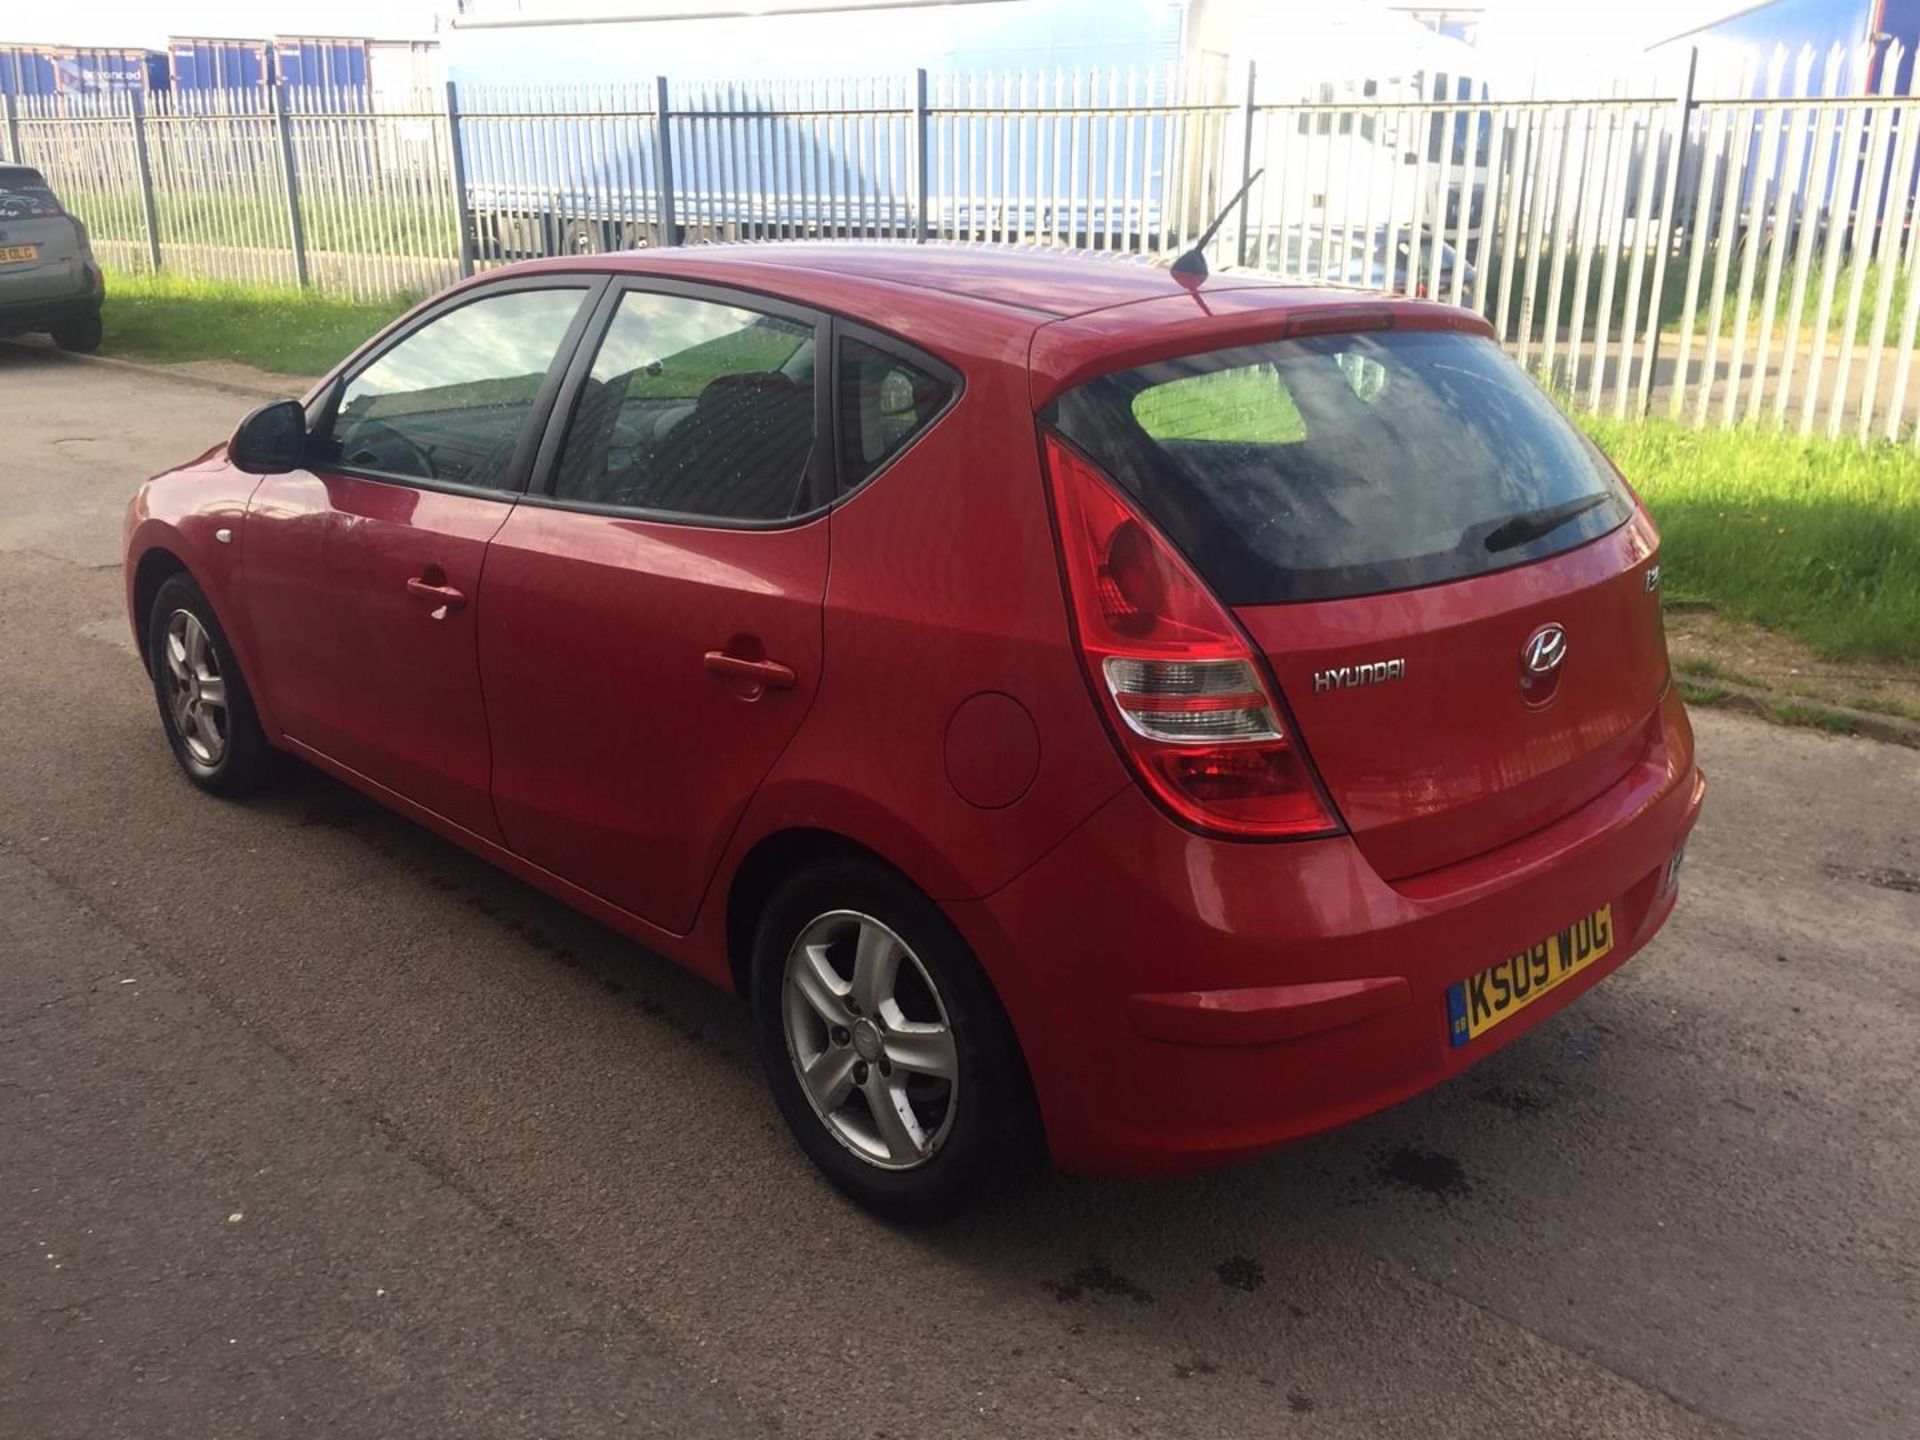 2009 Hyundai i30 Comfort 1.6 Petrol - CL505 - NO VAT ON THE HAMMER - Location: Corby - Image 4 of 11